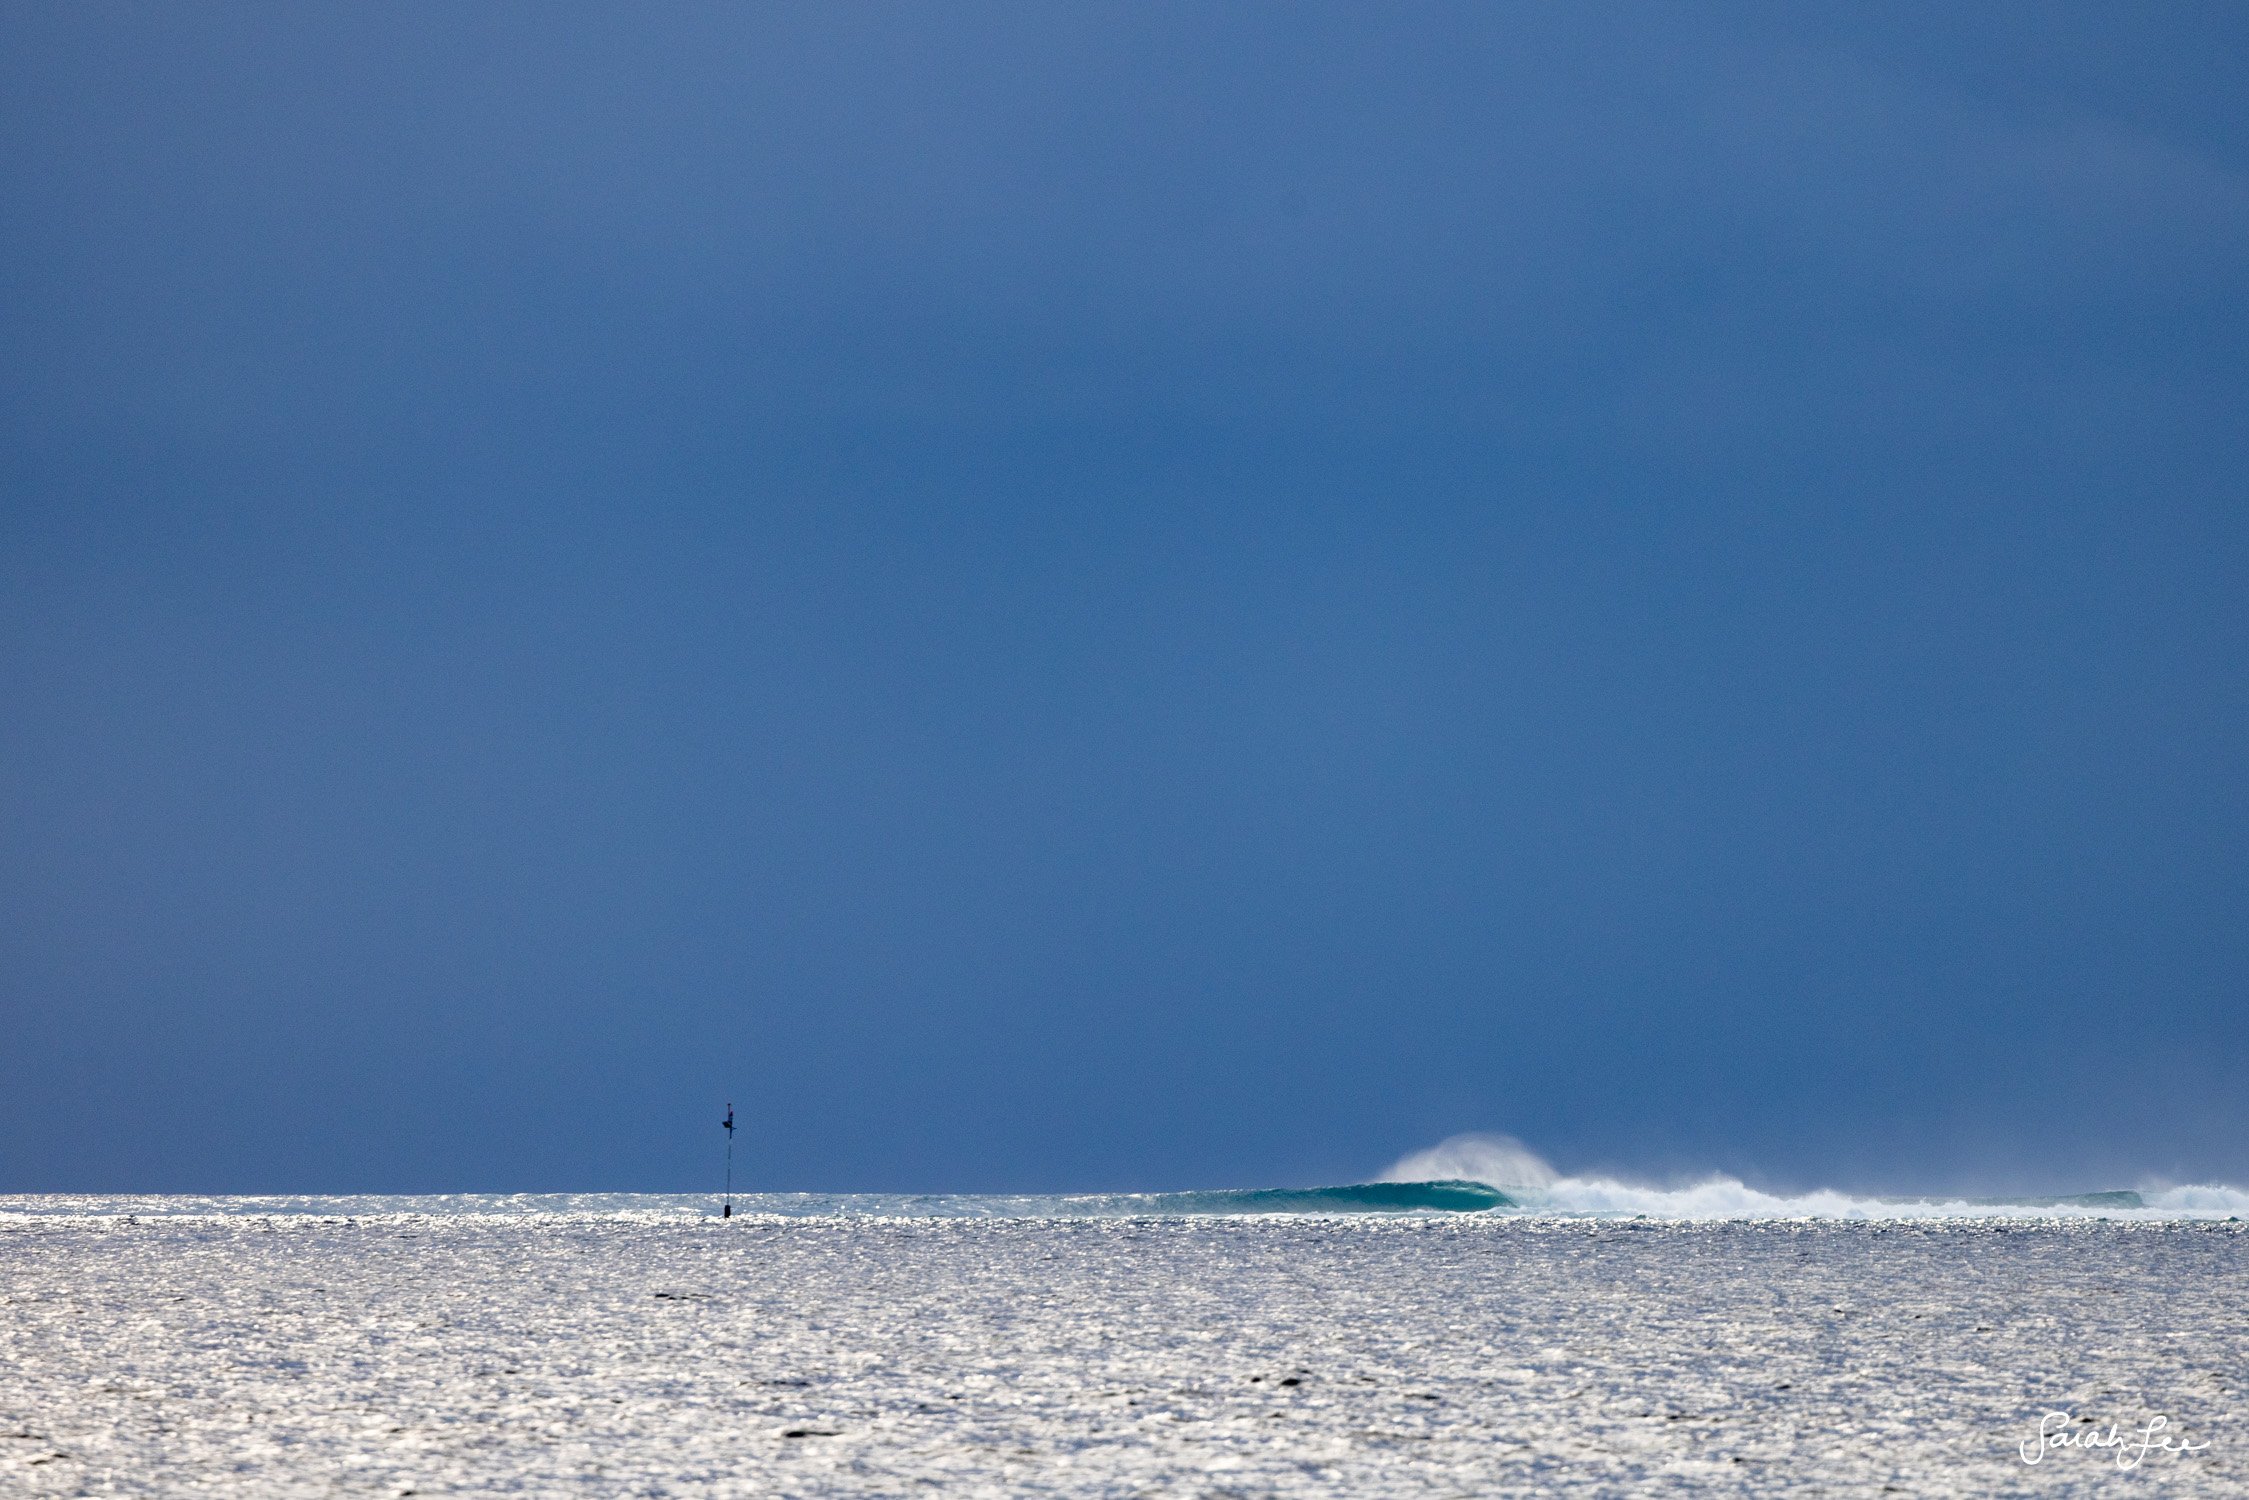 Big offshore waves in the Maldives